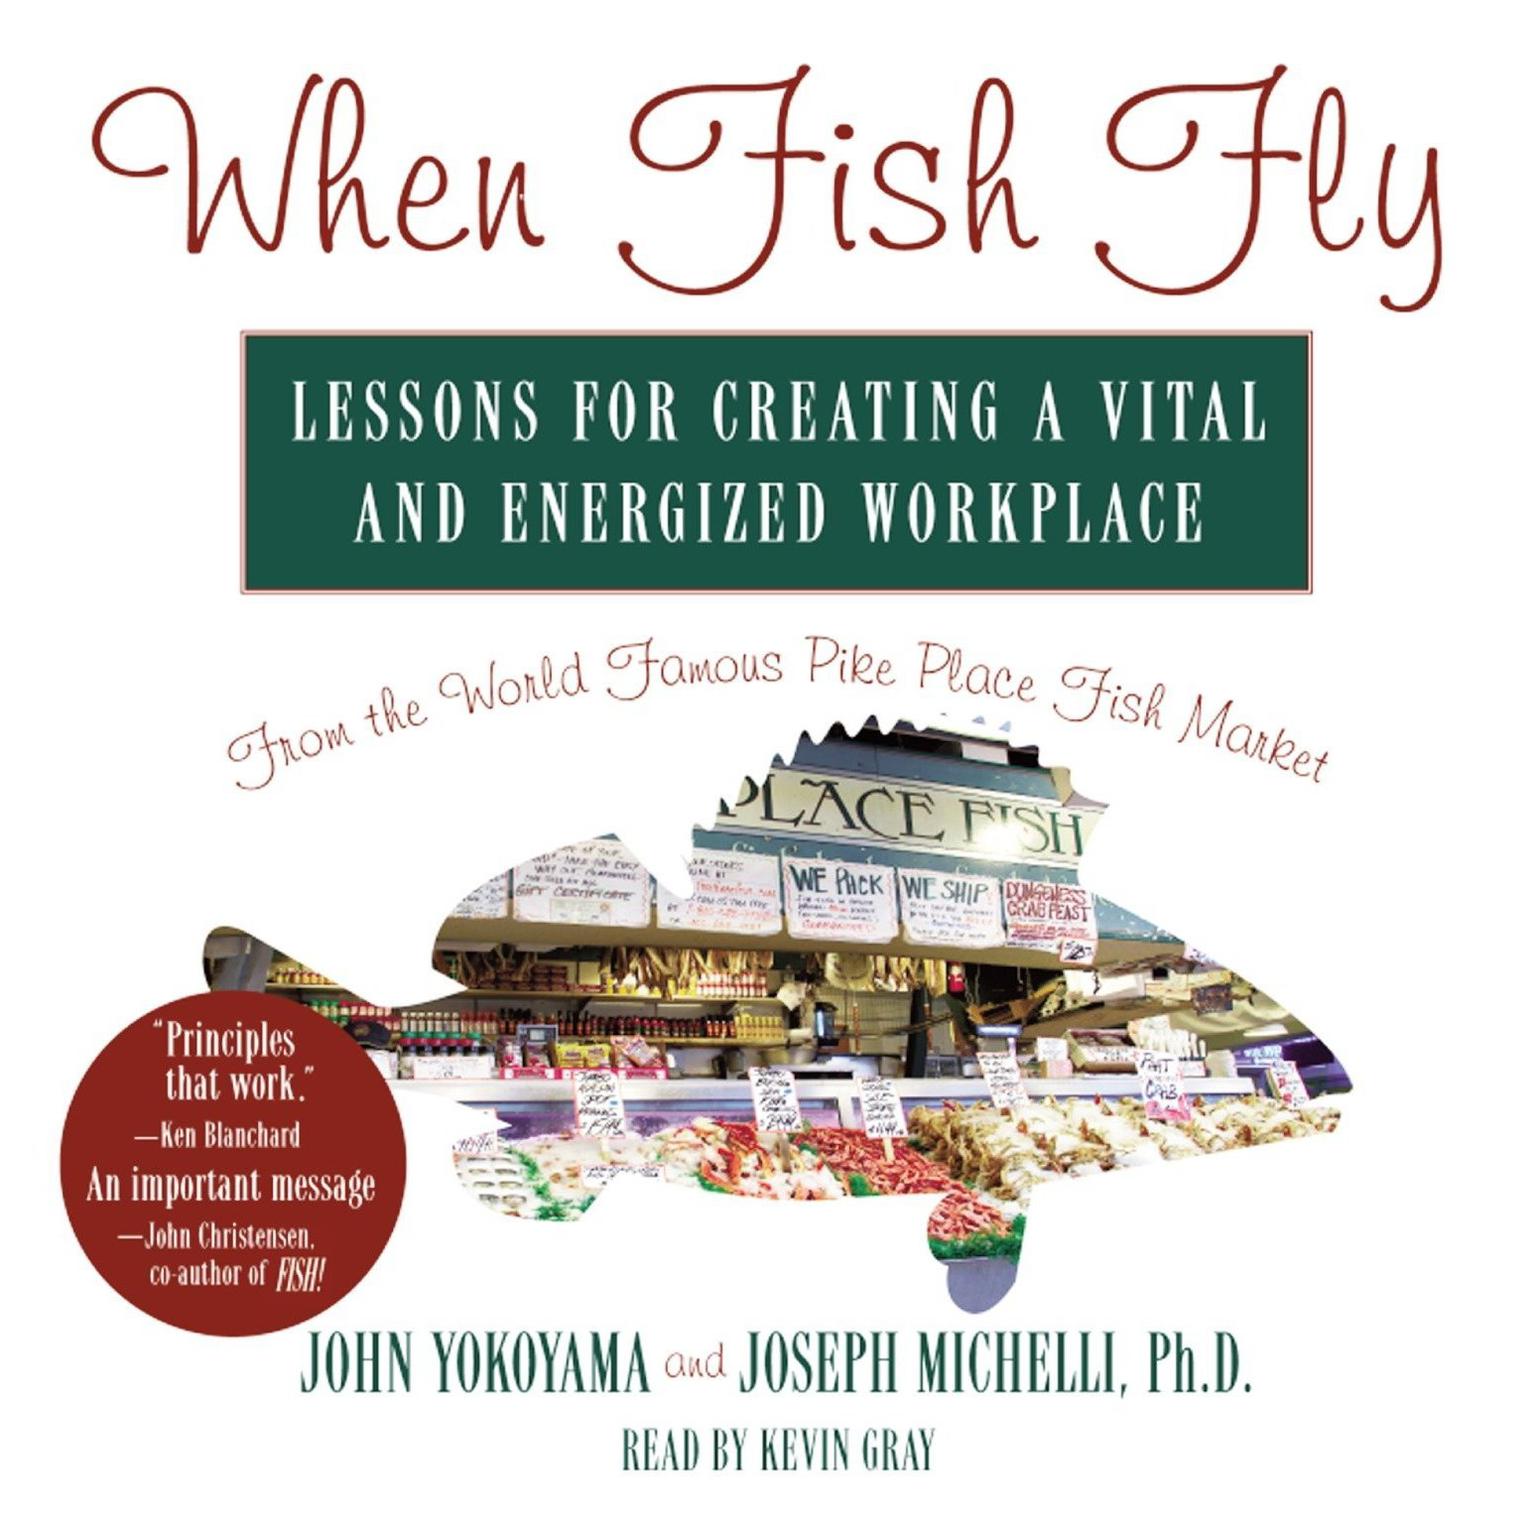 When Fish Fly (Abridged): Lessons for Creating a Vital and Energized Workplace from the World Famous Pike Place Fish Market Audiobook, by John Yokoyama